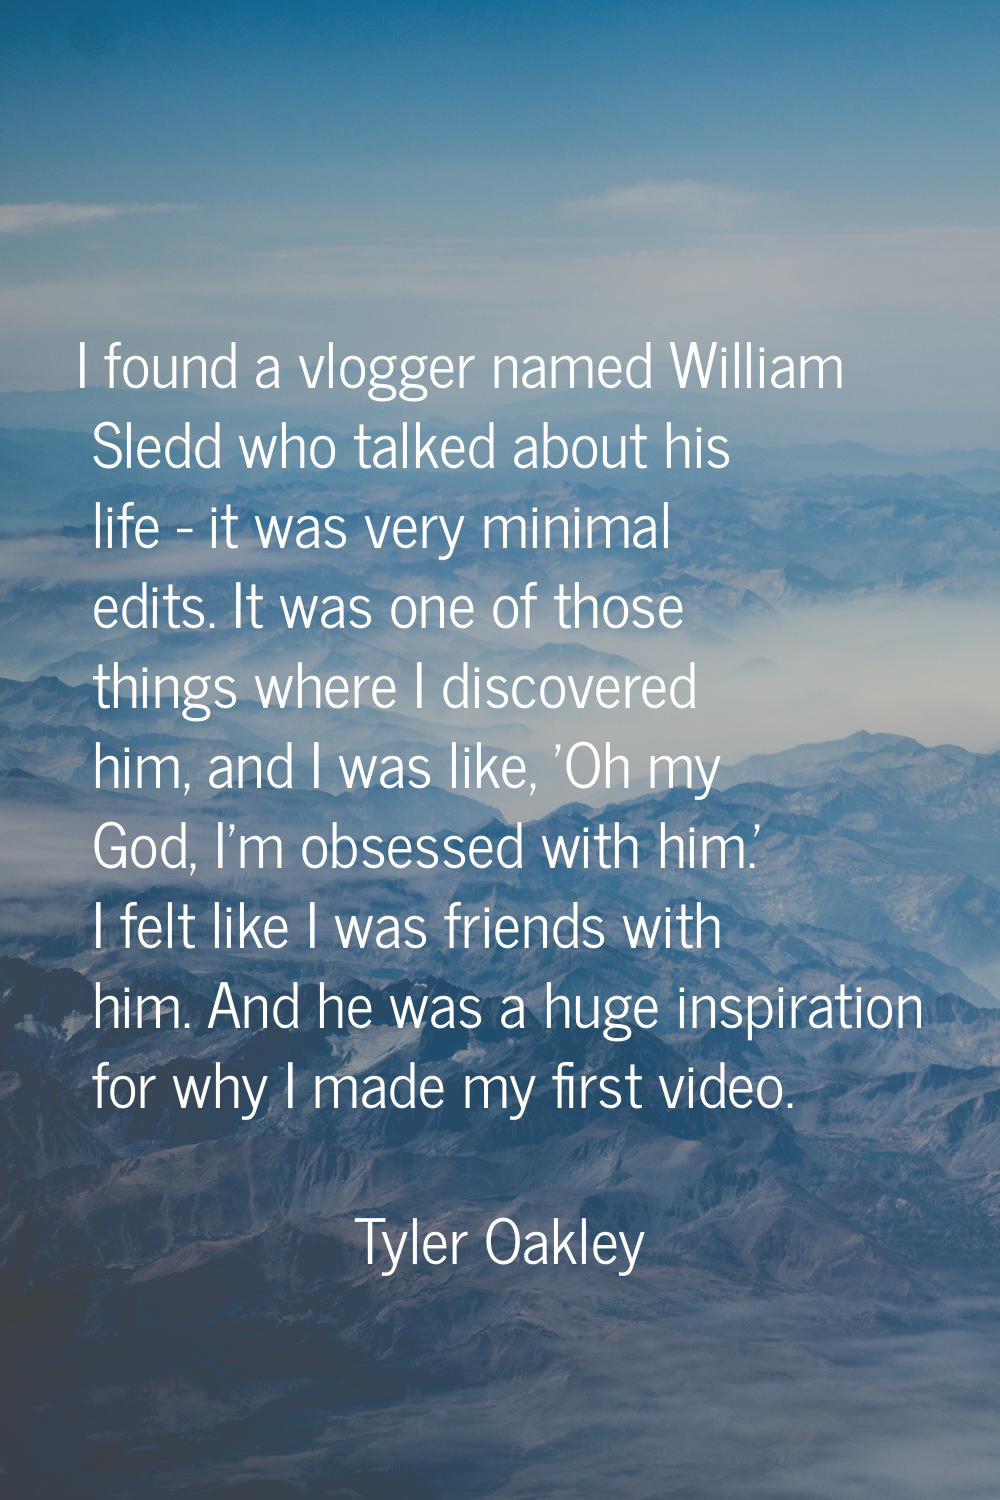 I found a vlogger named William Sledd who talked about his life - it was very minimal edits. It was